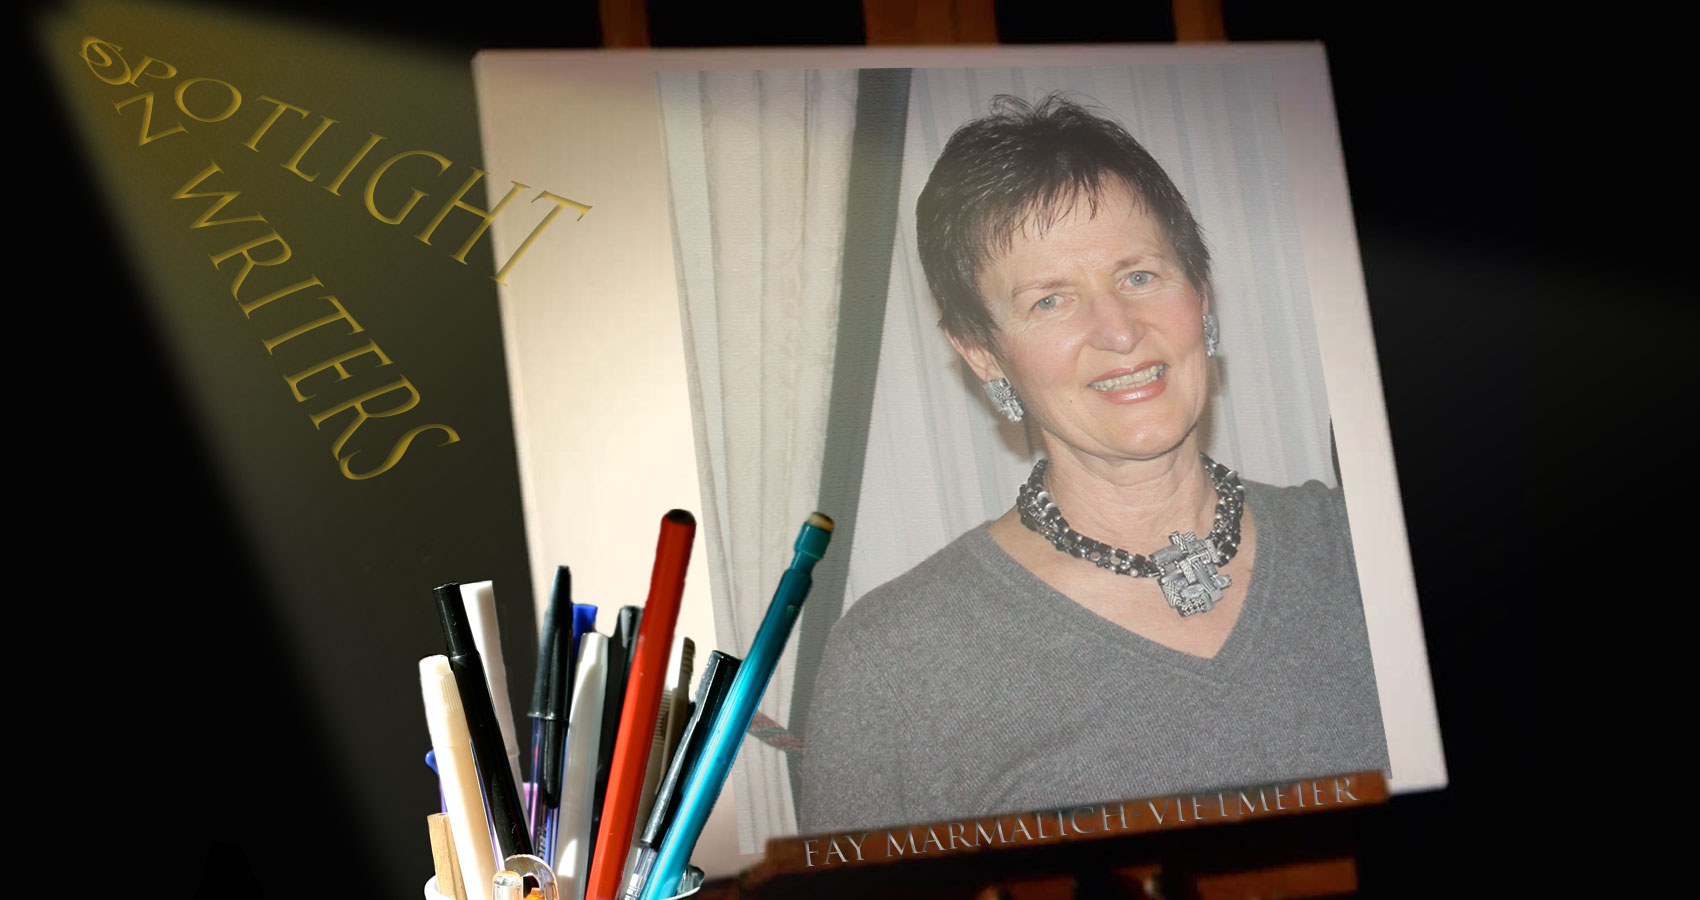 Spotlight On Writers - Fay Marmalich-Vietmeier, interview at Spillwords.com